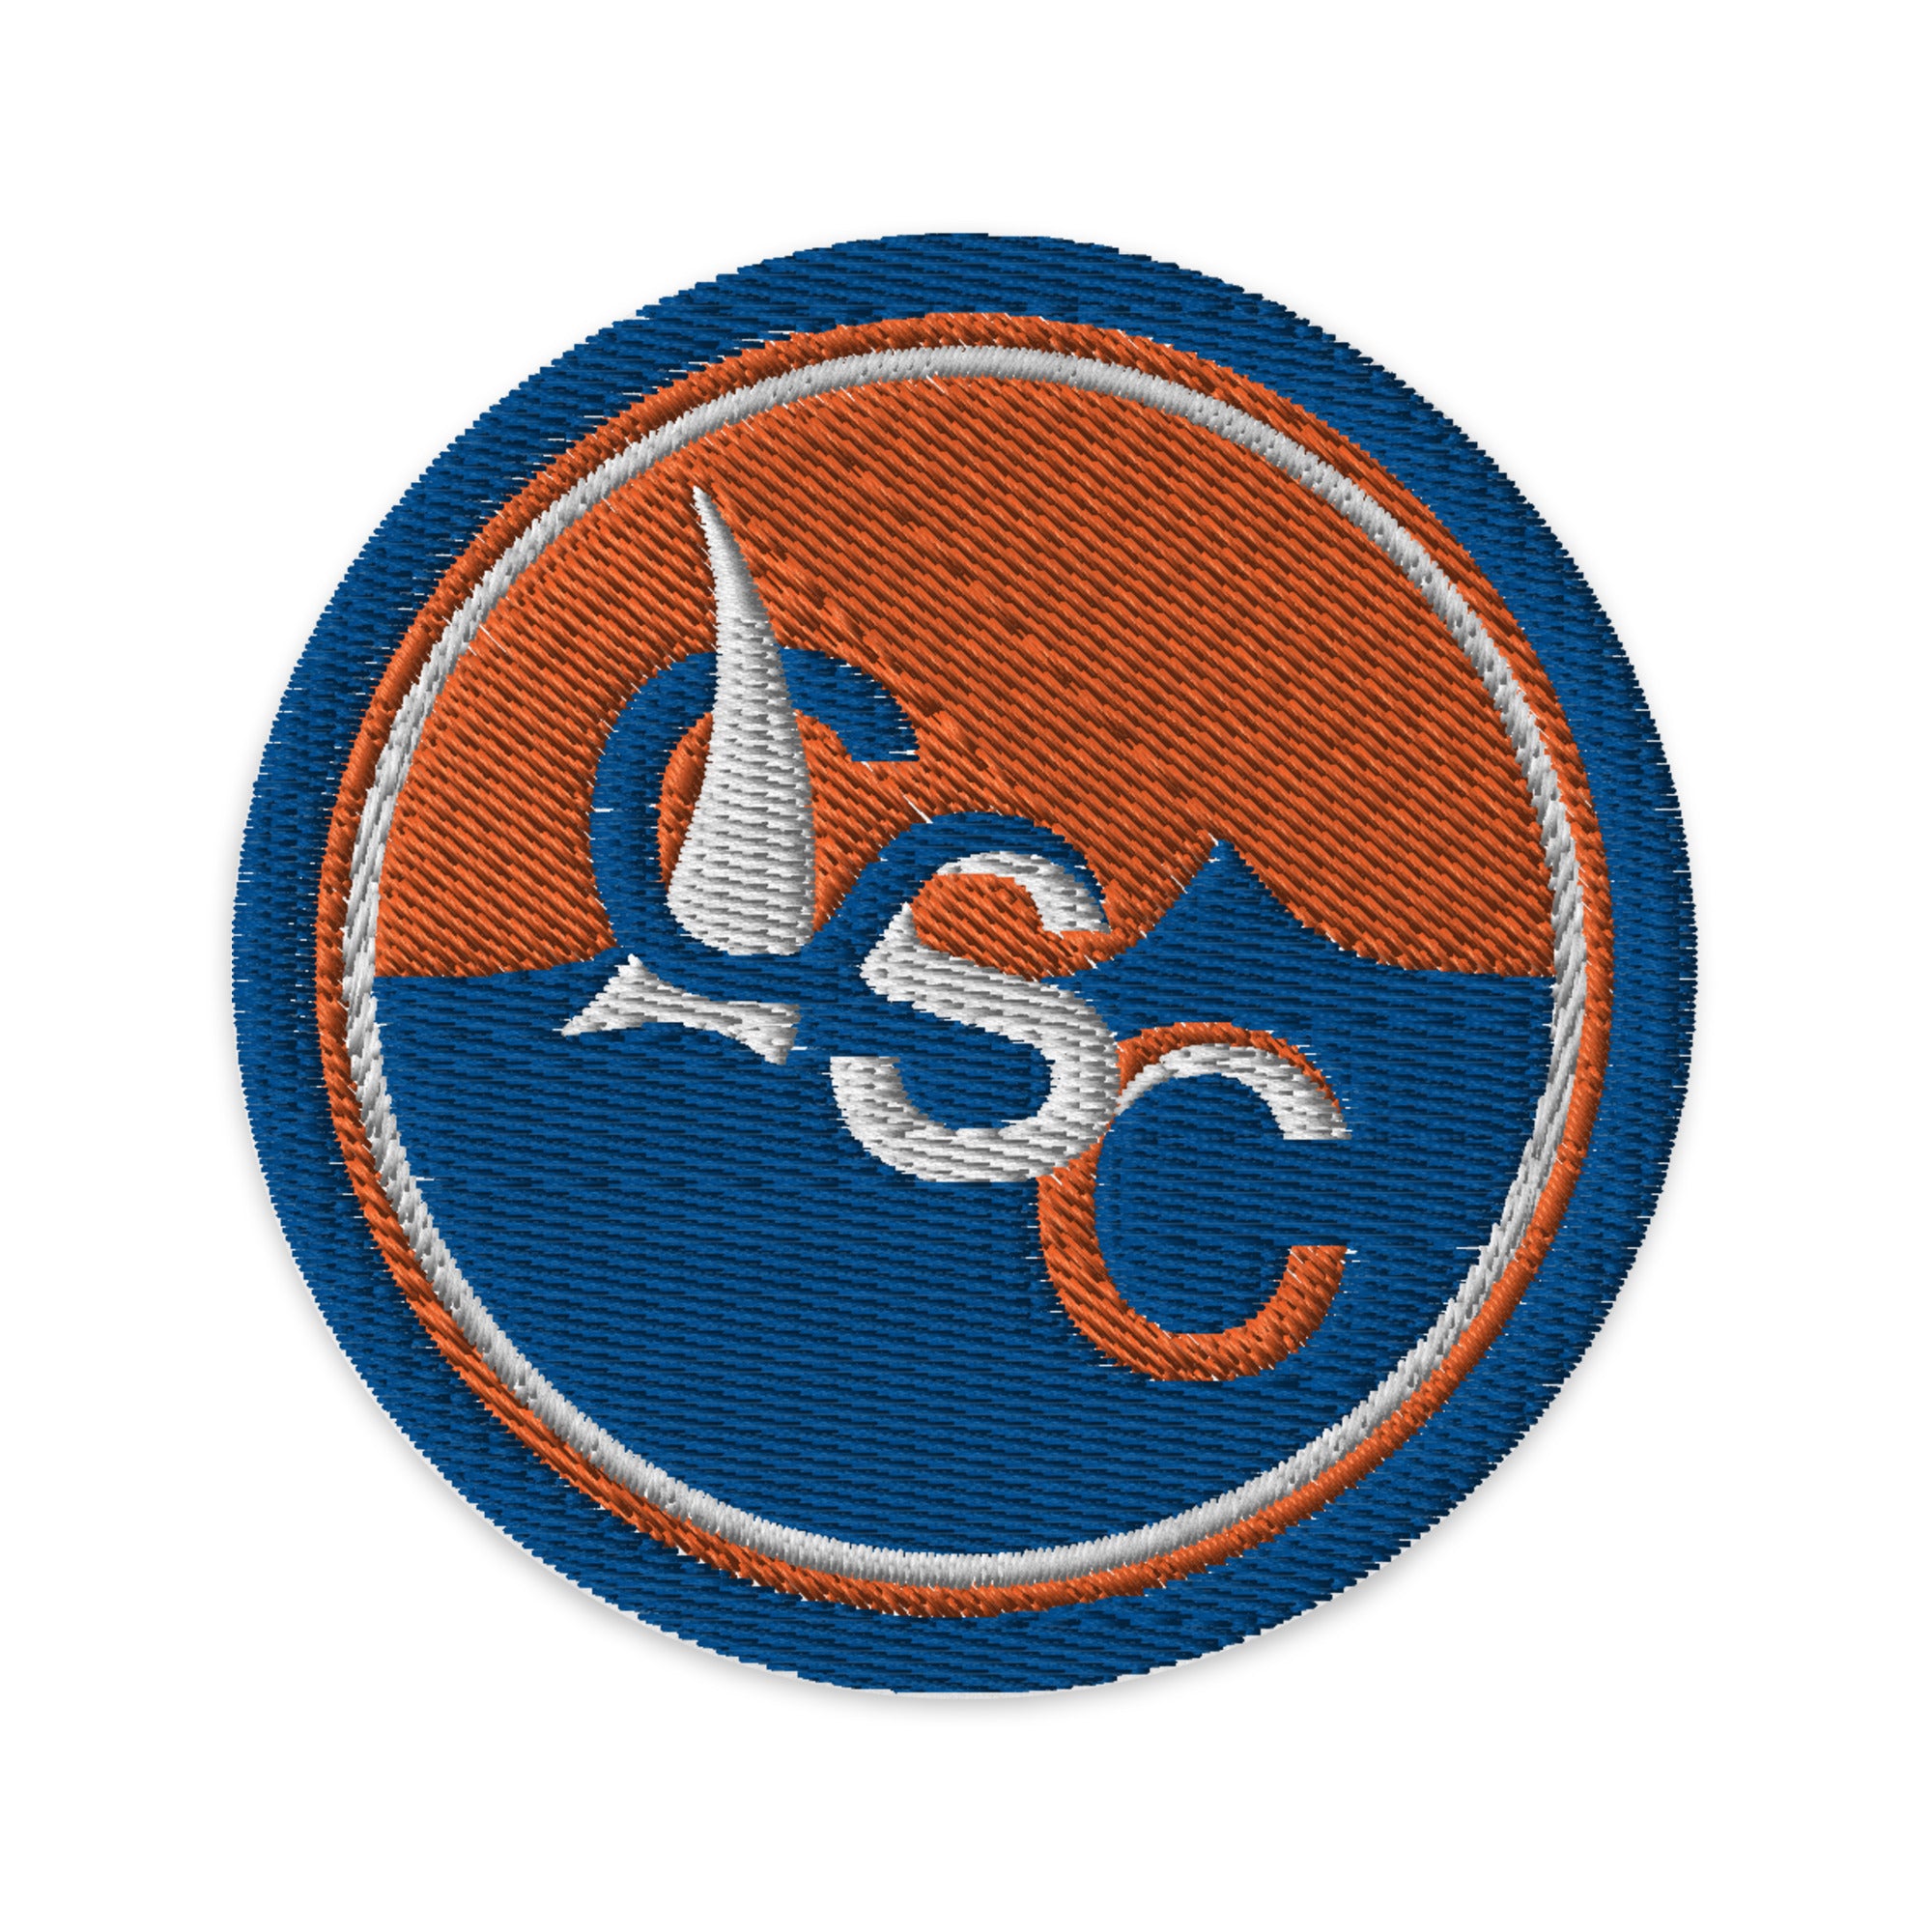 CSC Logo Embroidered Patch